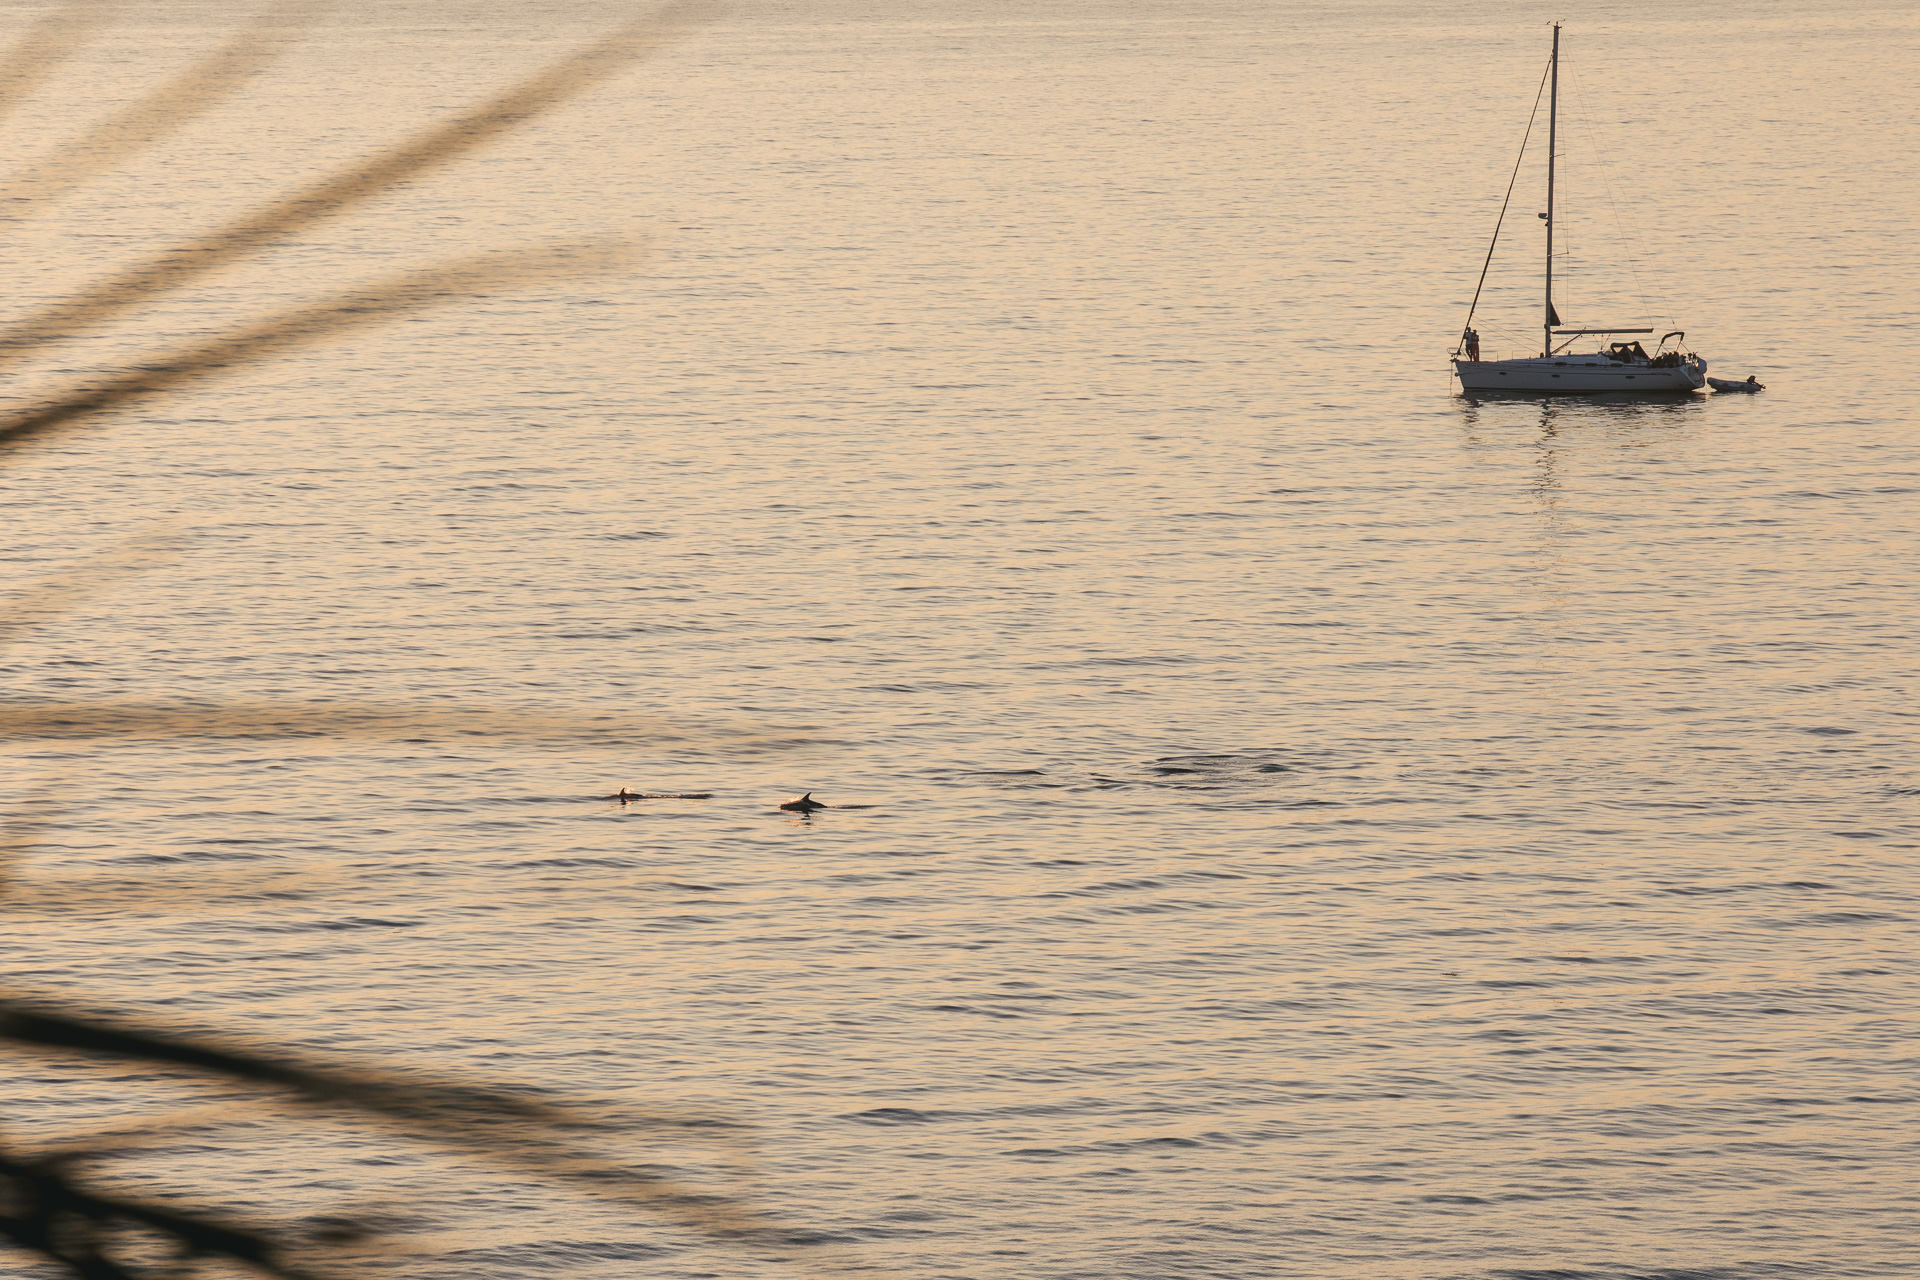 Dolphins swimming in the sea in the sunset